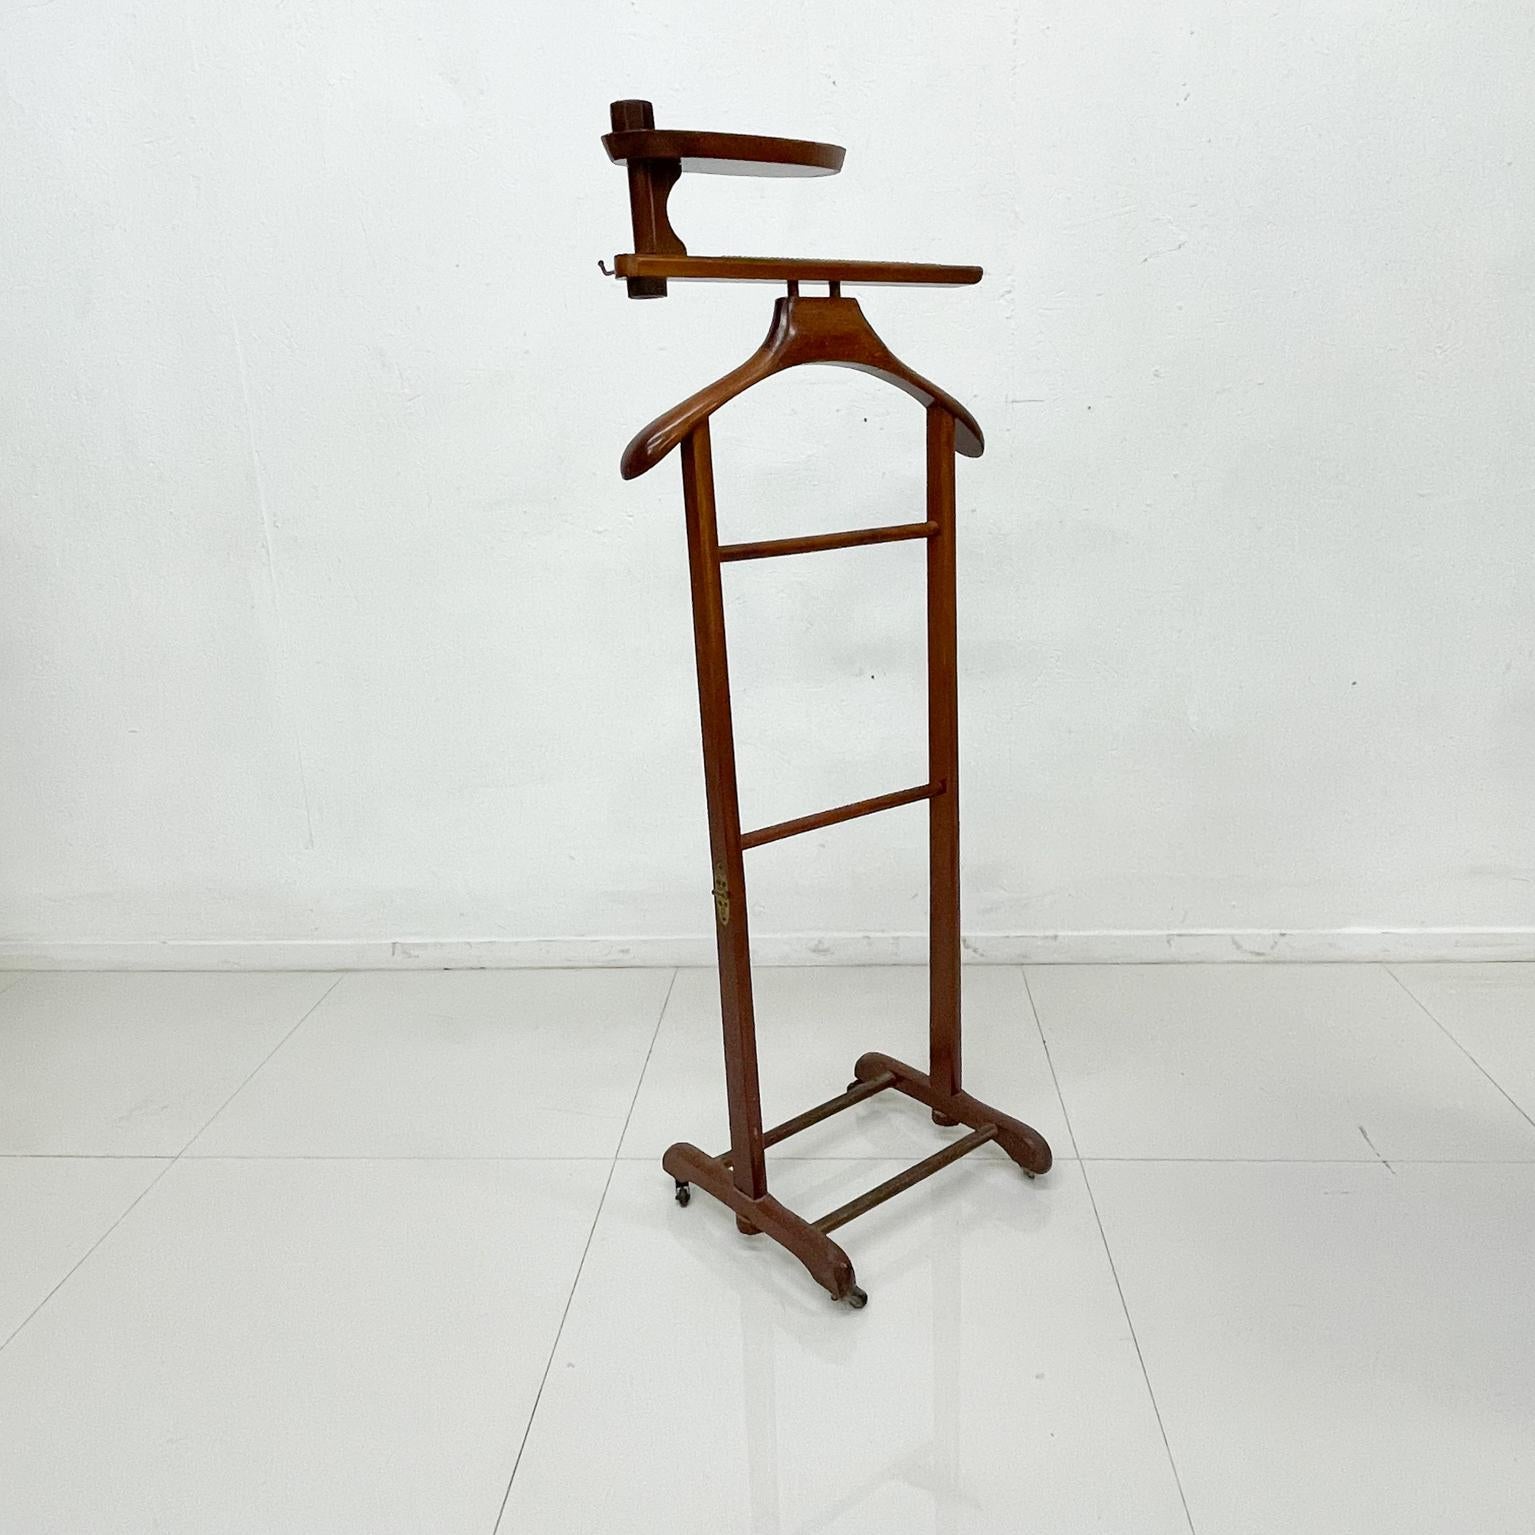 Mid-Century Modern Gentleman's Collapsible Wood Travel Valet Stand on Wheels 1950s Made in Italy